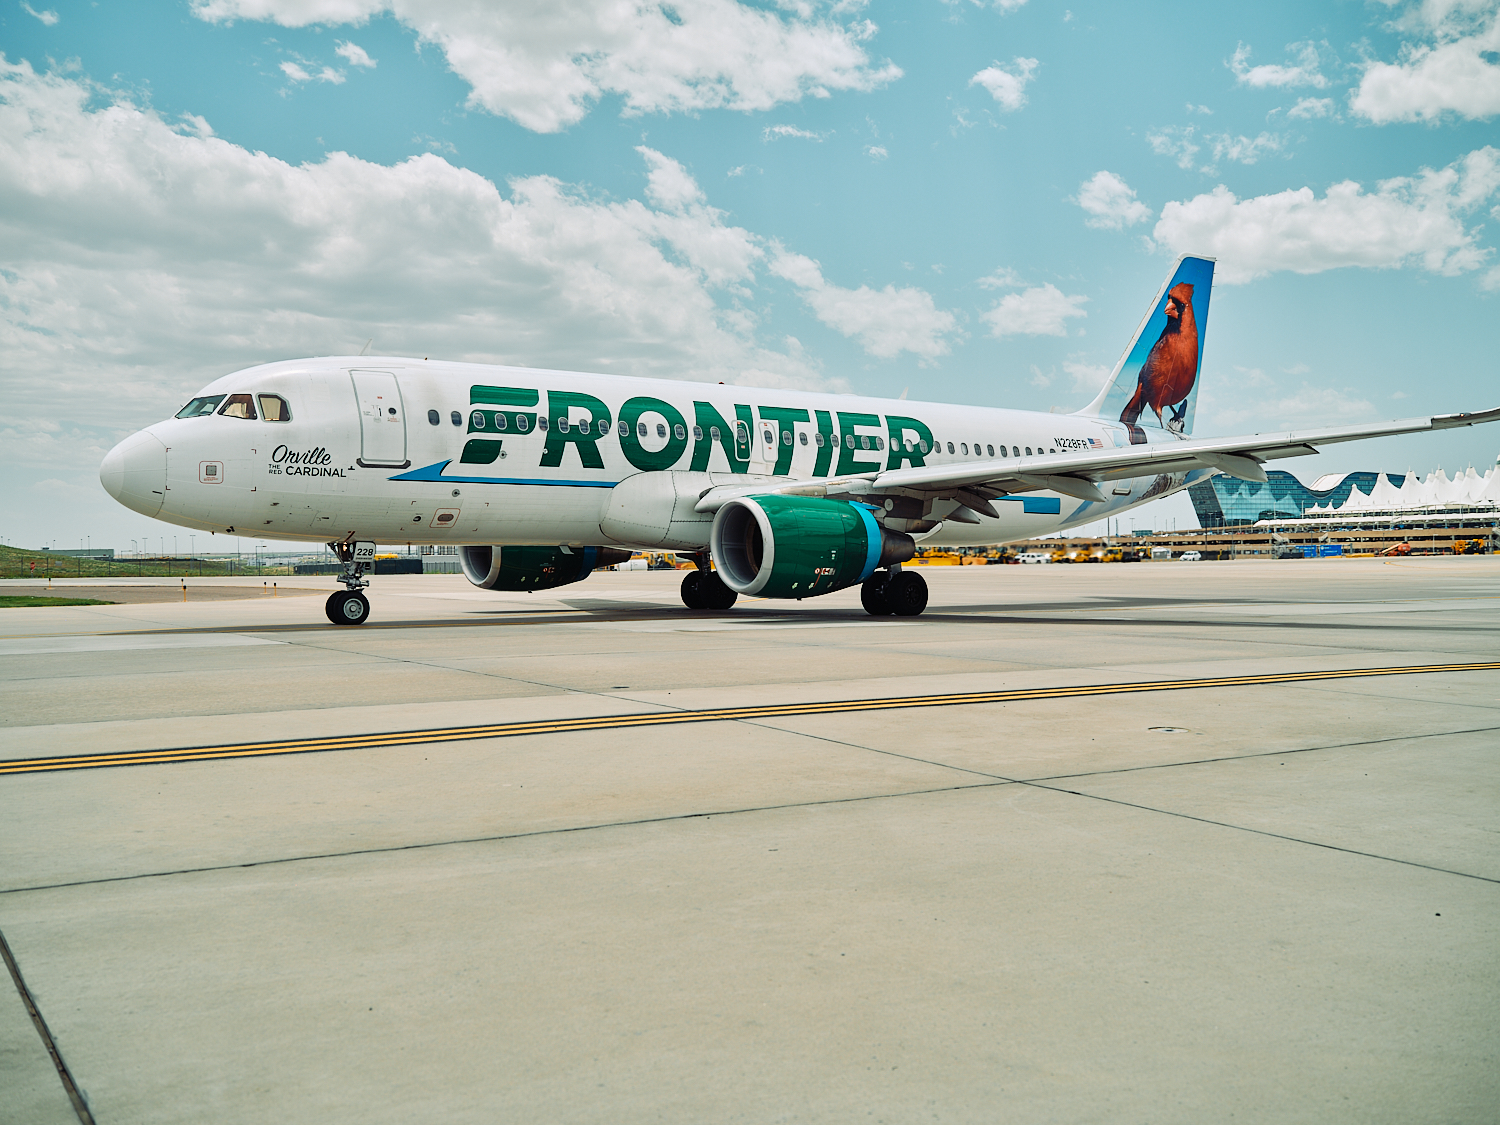 A Frontier Airlines plane with a cardinal on the tail taxis on the tarmac under a cloudy sky.